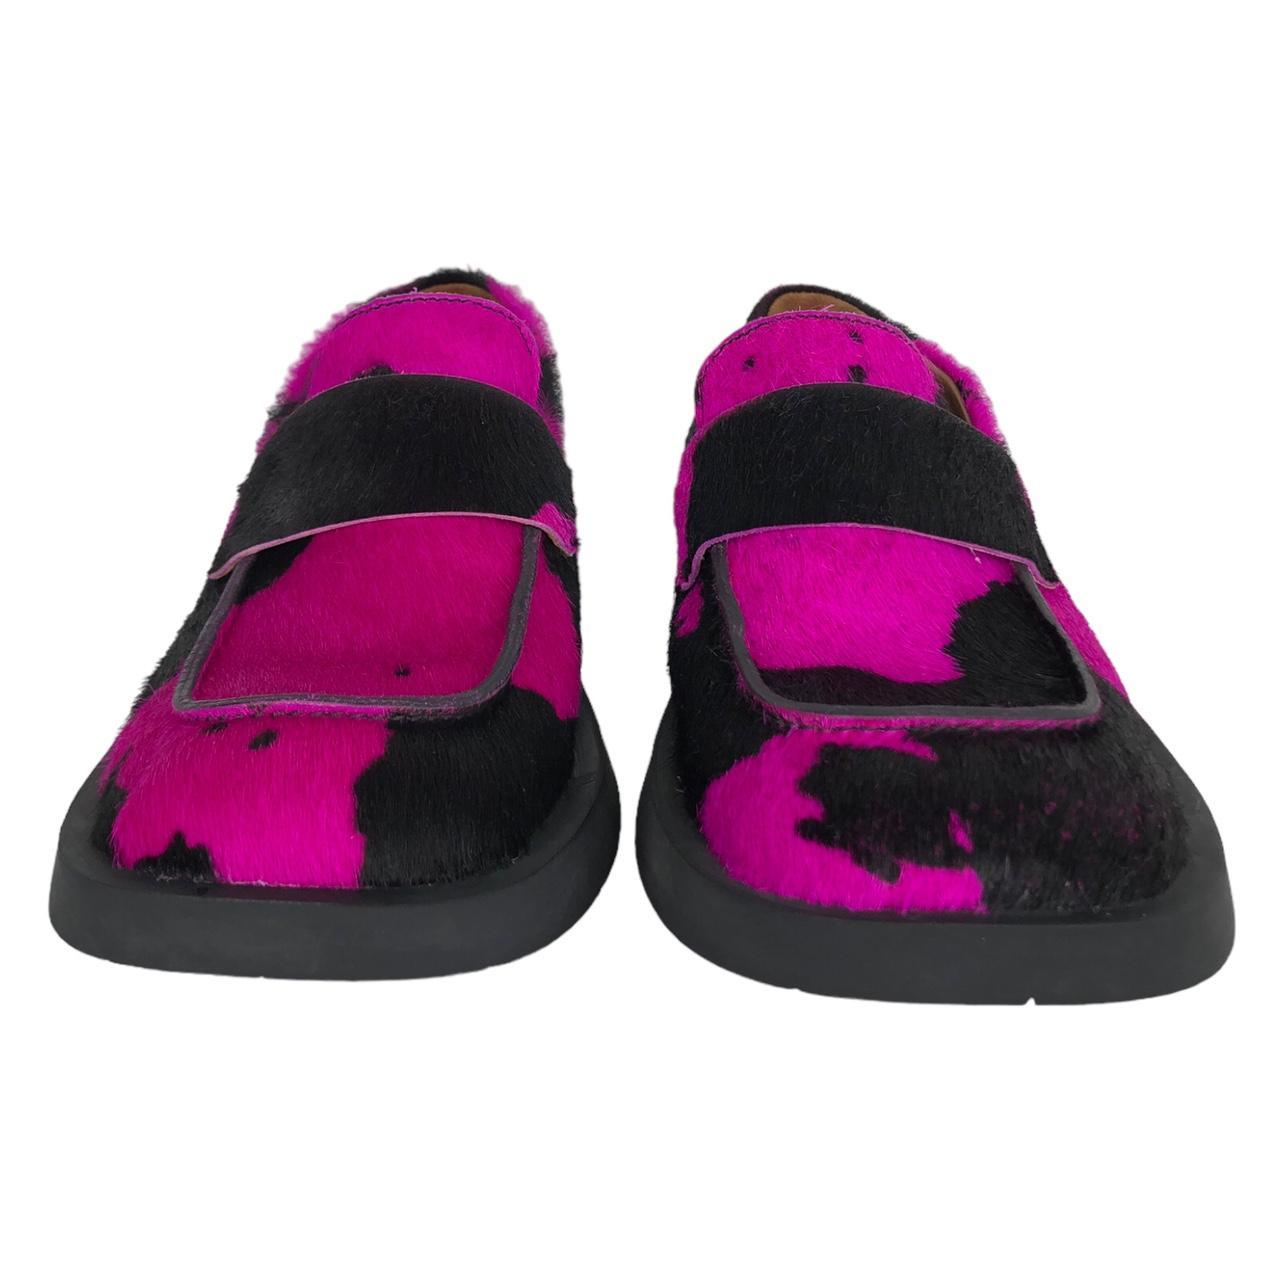 CamperLab Women's Pink and Black Loafers (5)